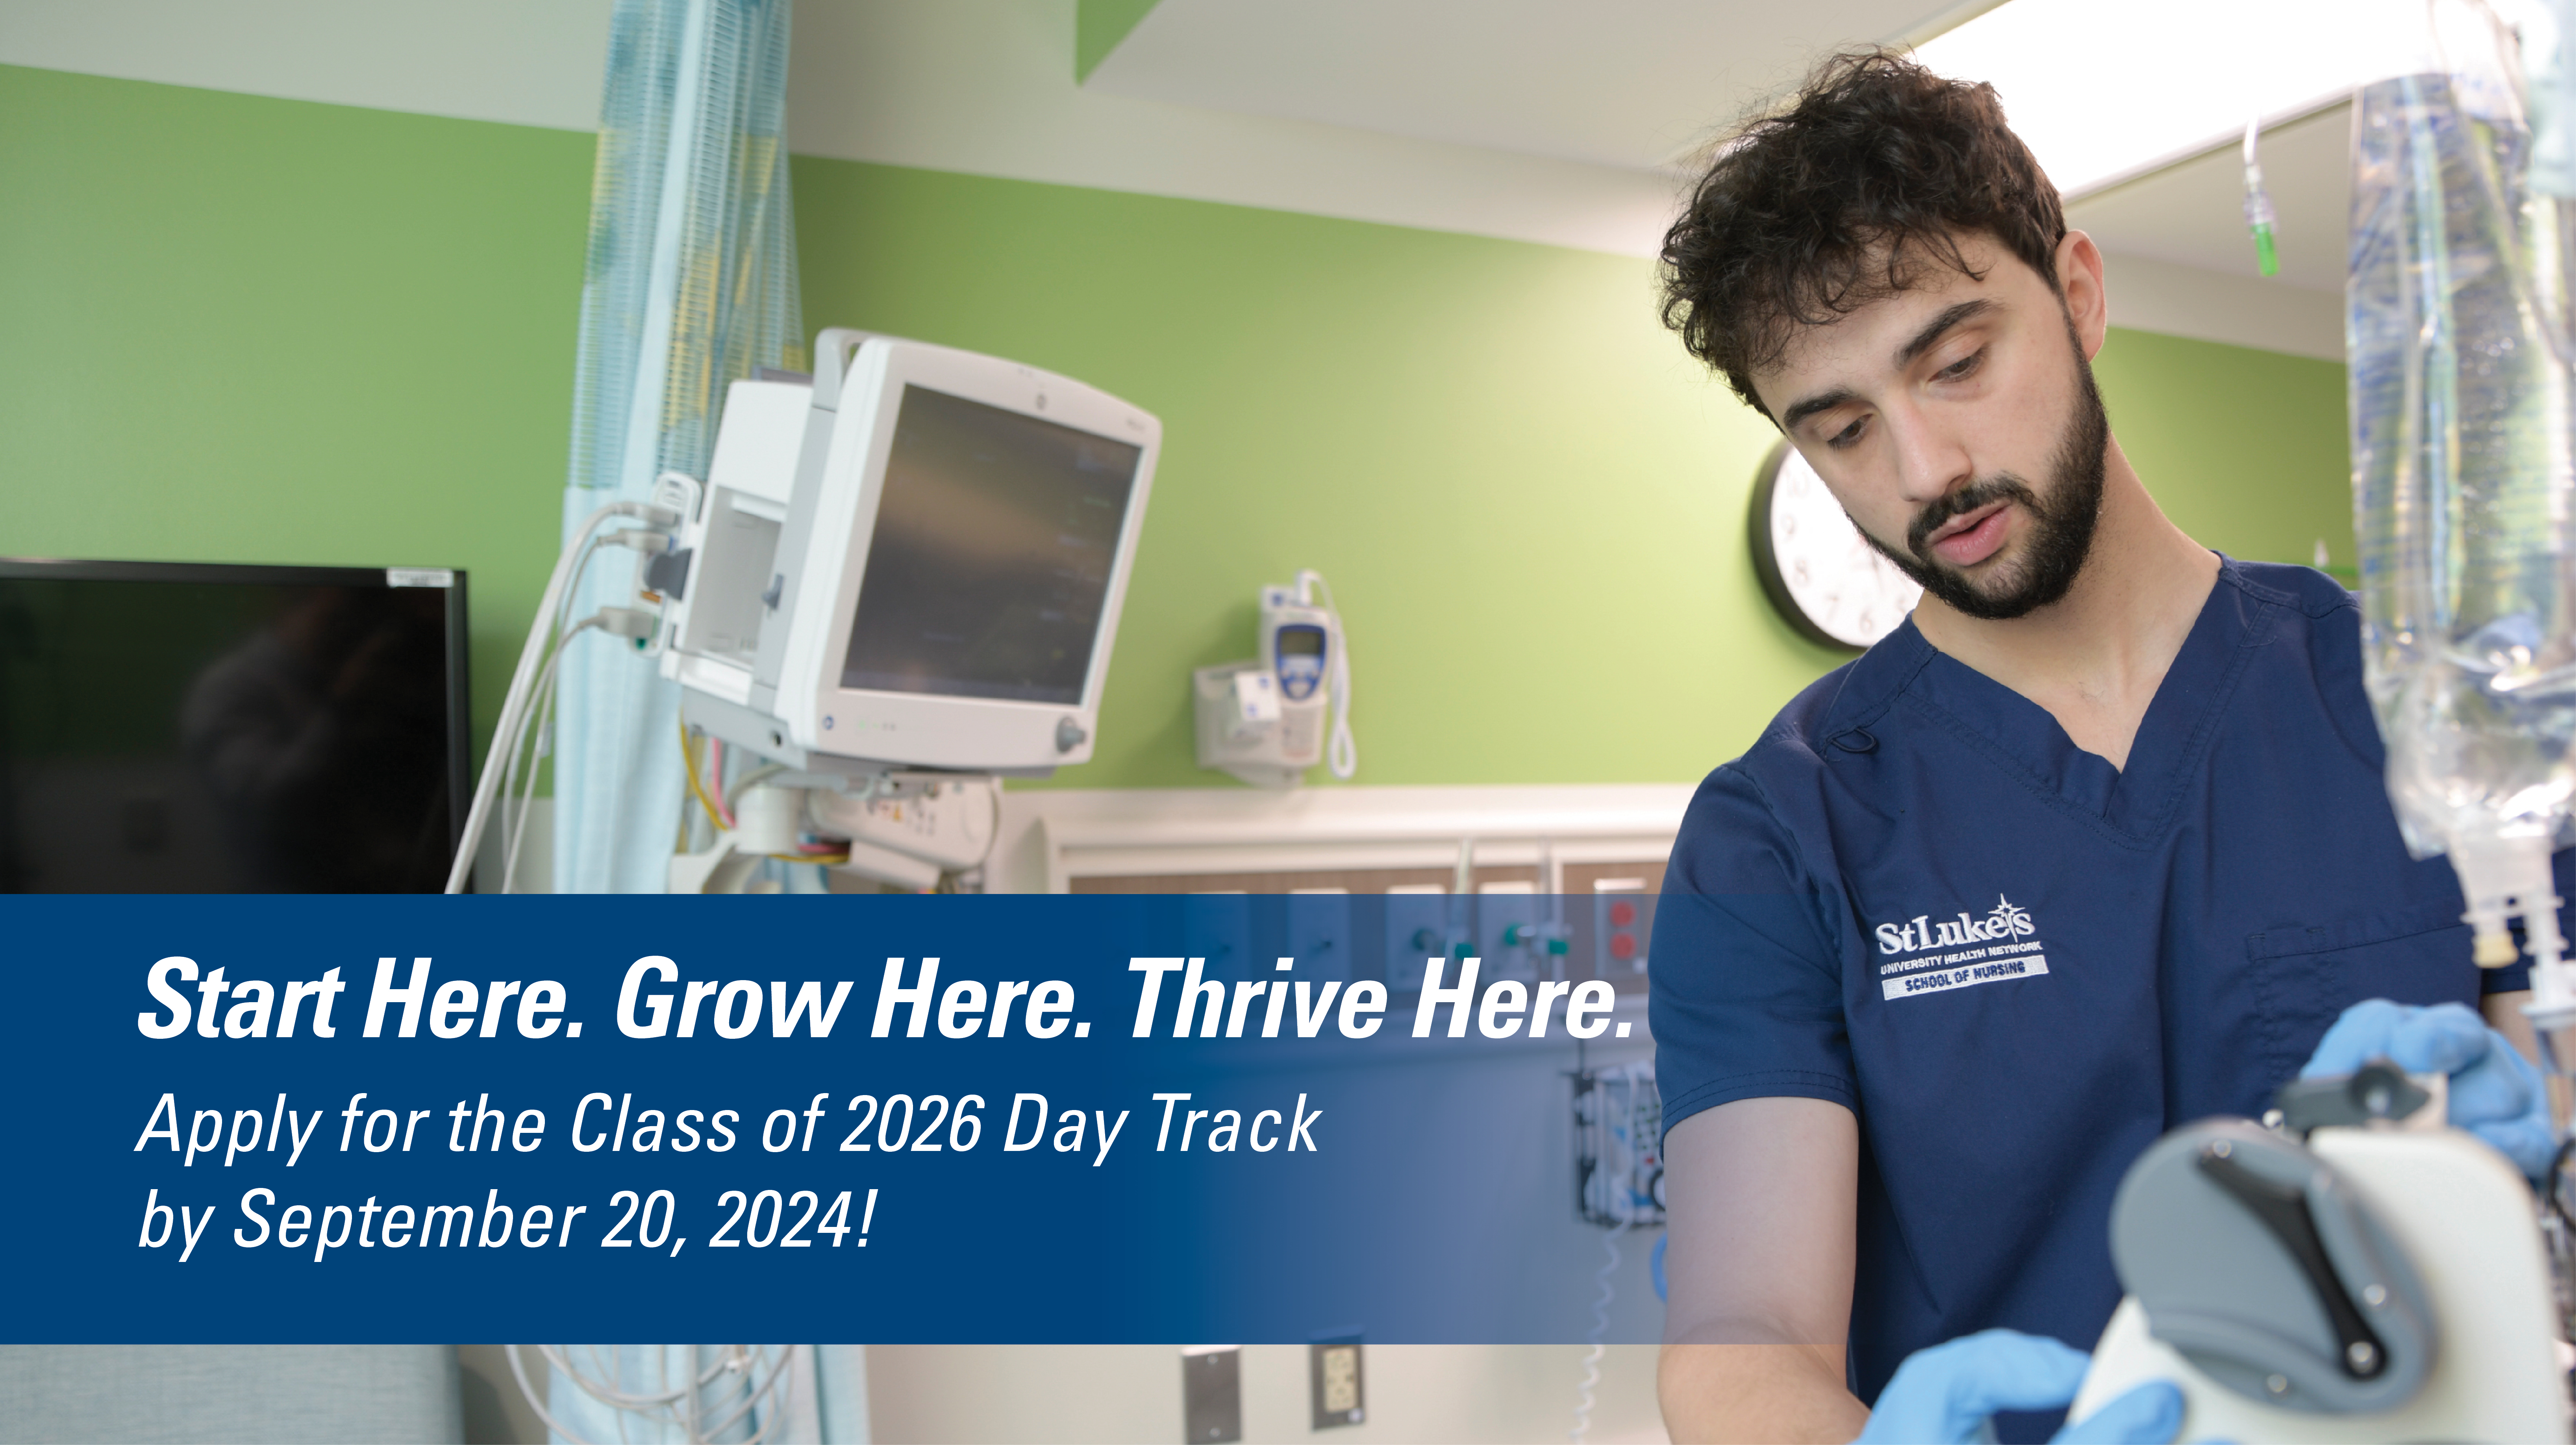 Start Here, Grow Here, Thrive Here. Apply for the Class of 2026 Day Track.